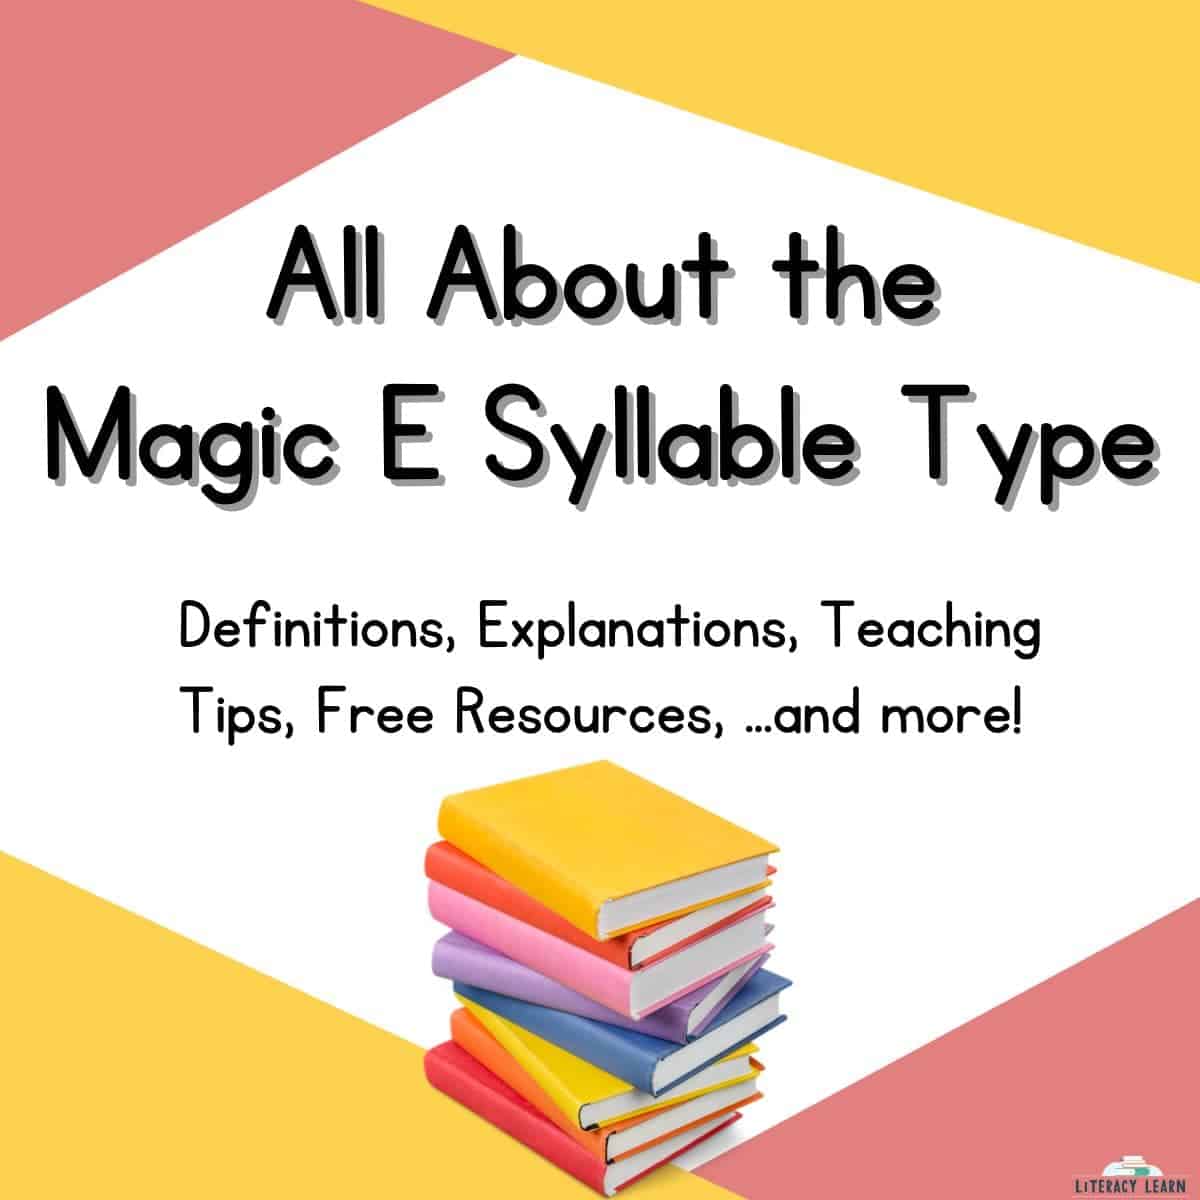 Yellow and Pink graphic entitled "All About the Magic E Syllable Type" with a stack of book.